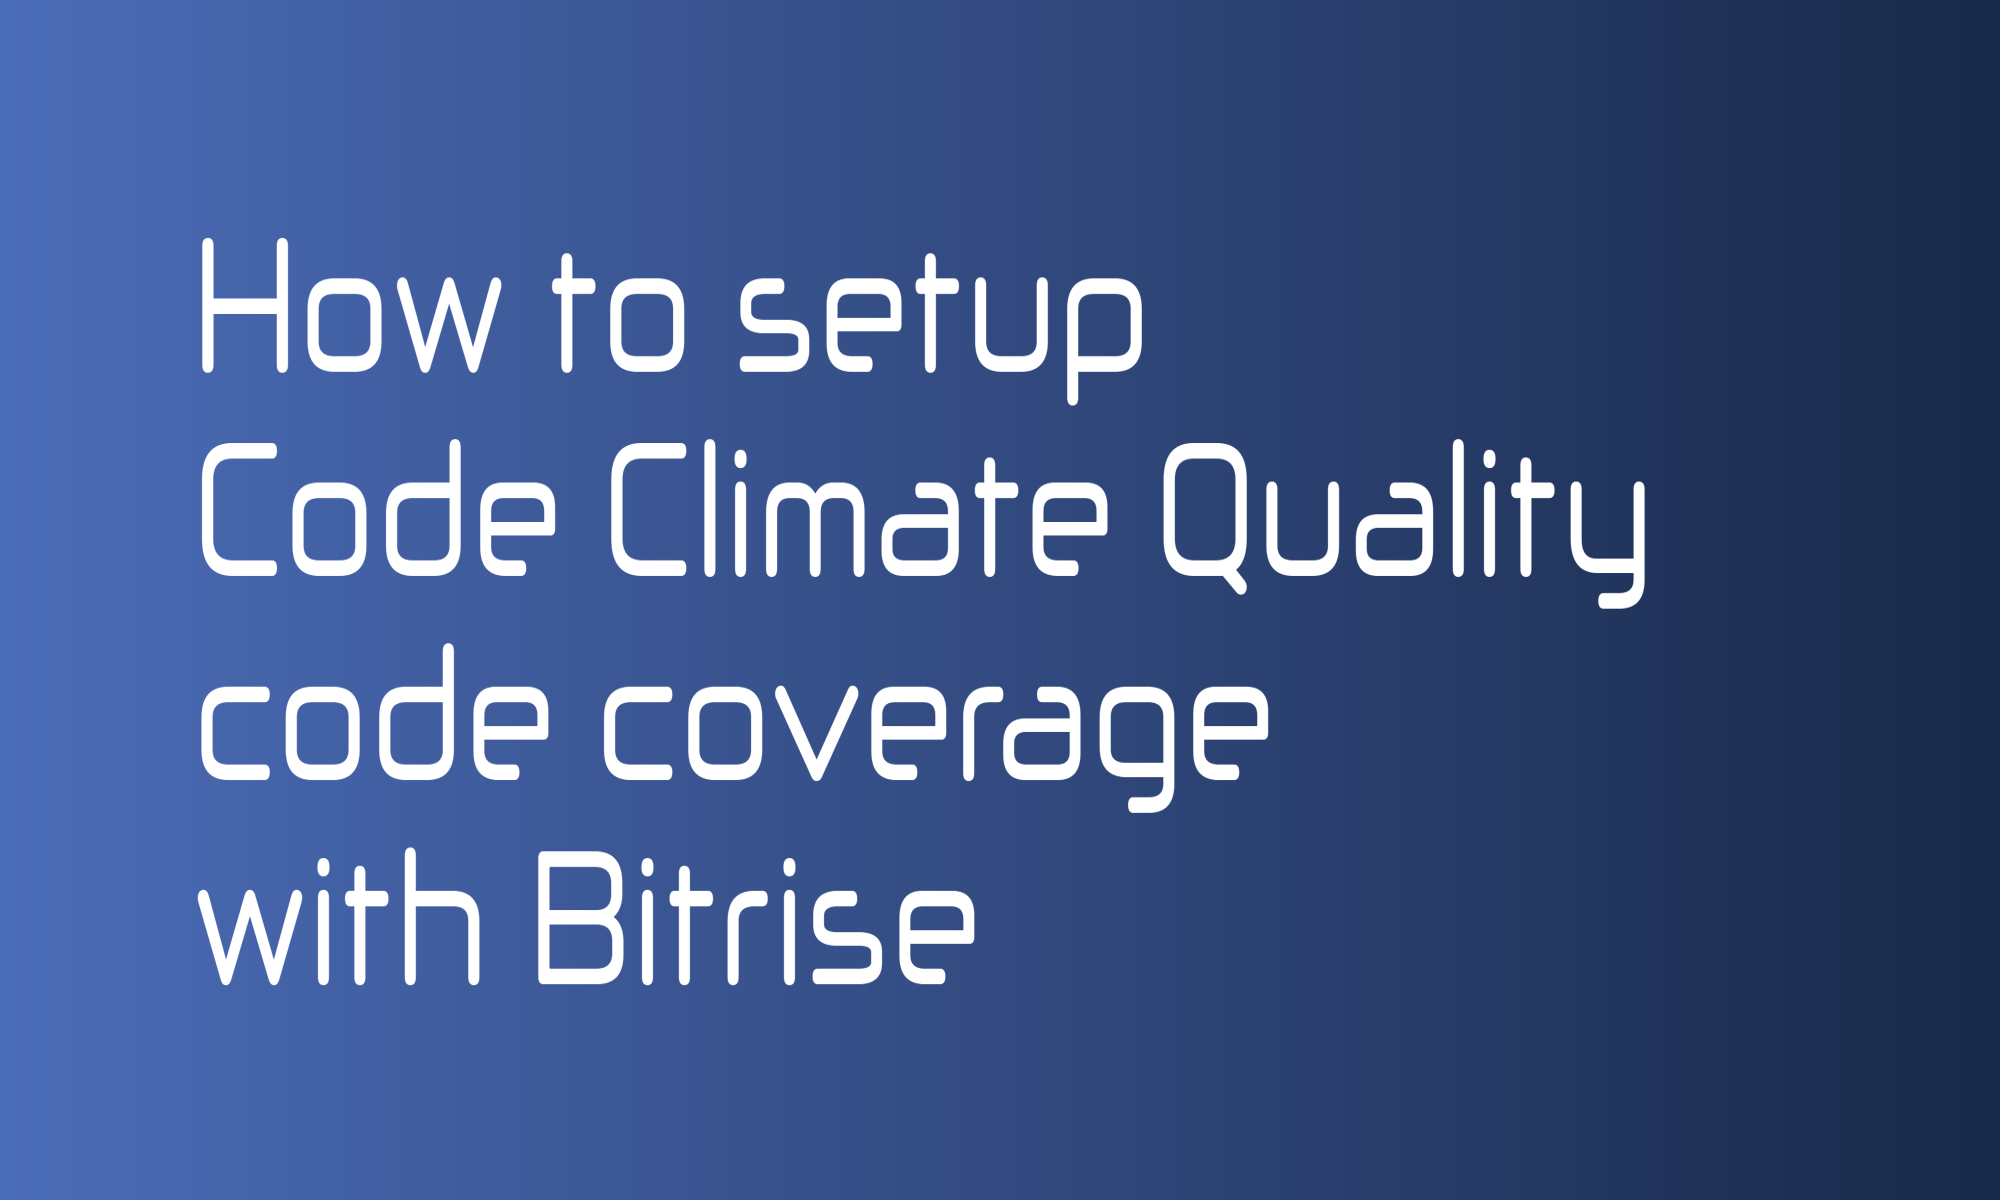 How to setup Code Climate Quality test coverage with Bitrise